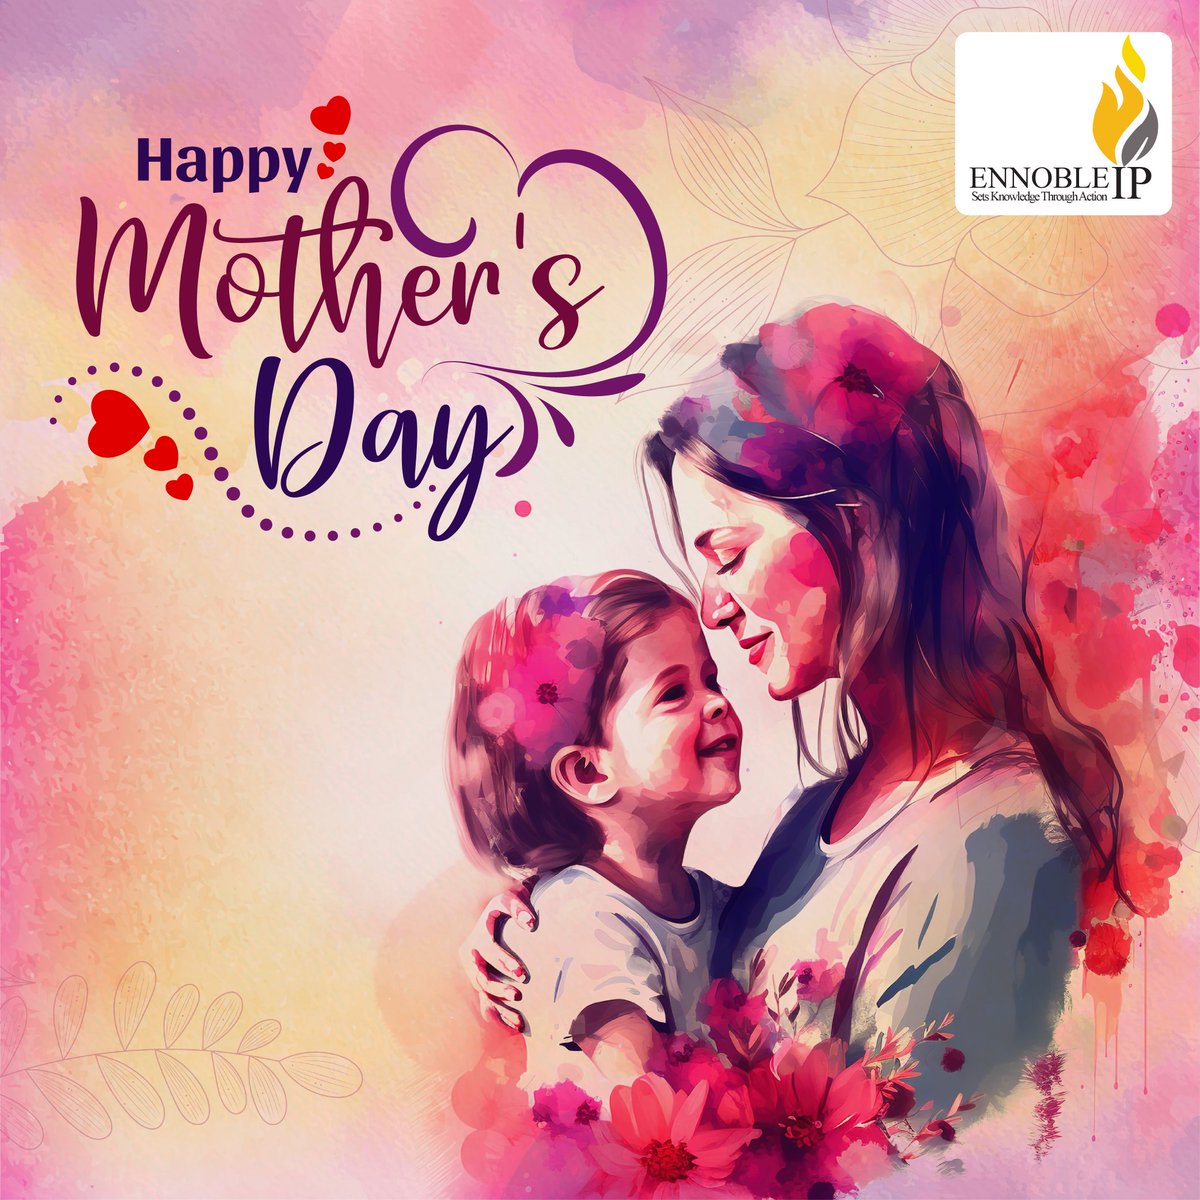 On this special day, we honor and appreciate all the incredible mothers who fill our lives with love and joy. Thank you for your unconditional support and endless sacrifices. 

#HappyMothersDay #MomAppreciation #MomInspirations #shereal #momiloveyou #GratefulDaughtersAndSons